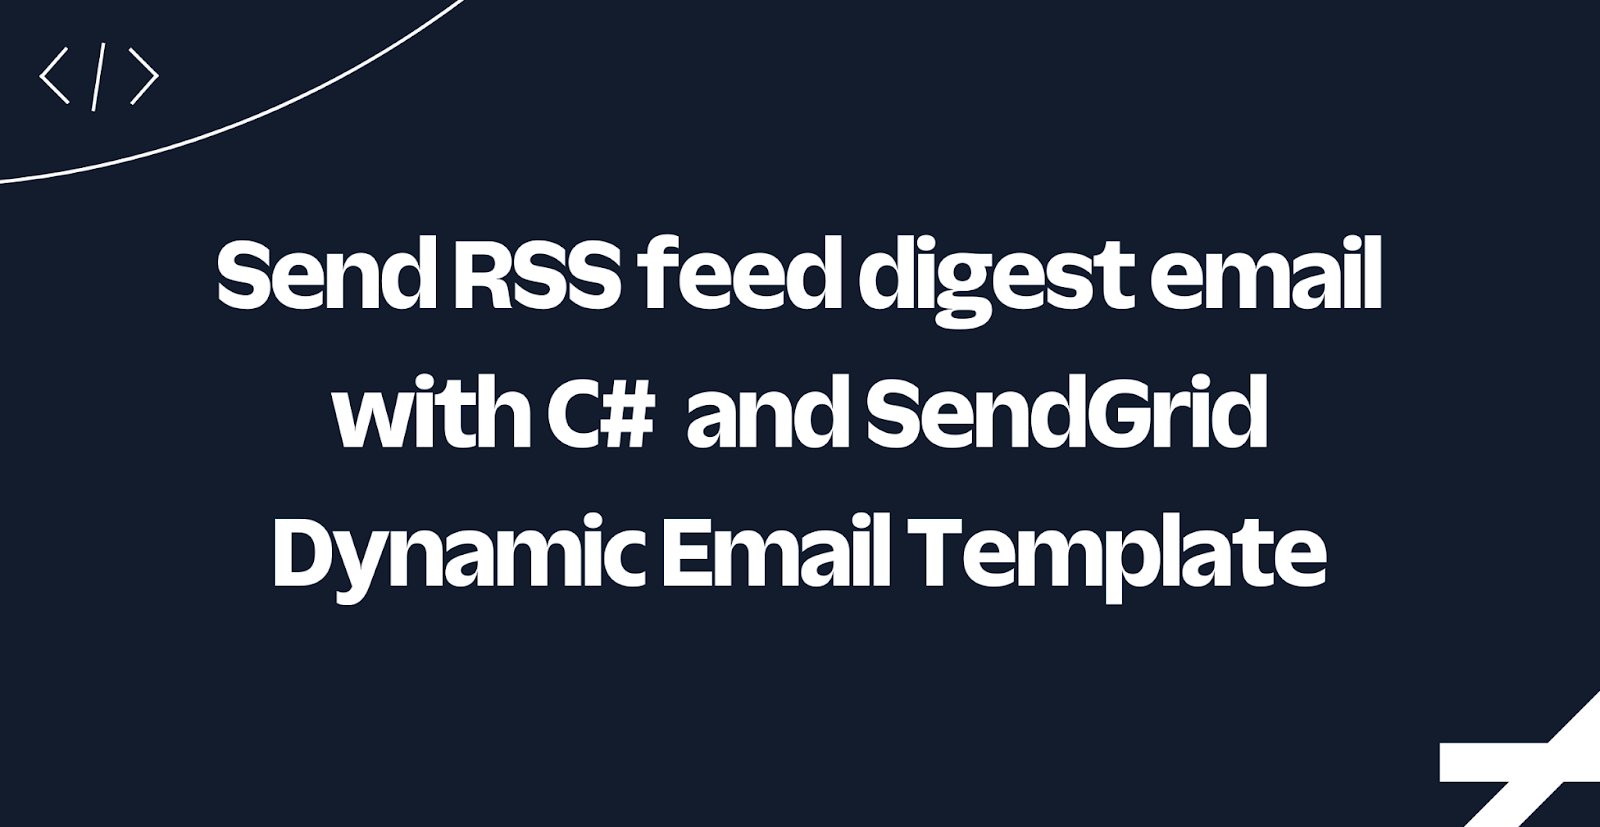 How to send RSS feed digest email with C# and SendGrid Dynamic Email Templates